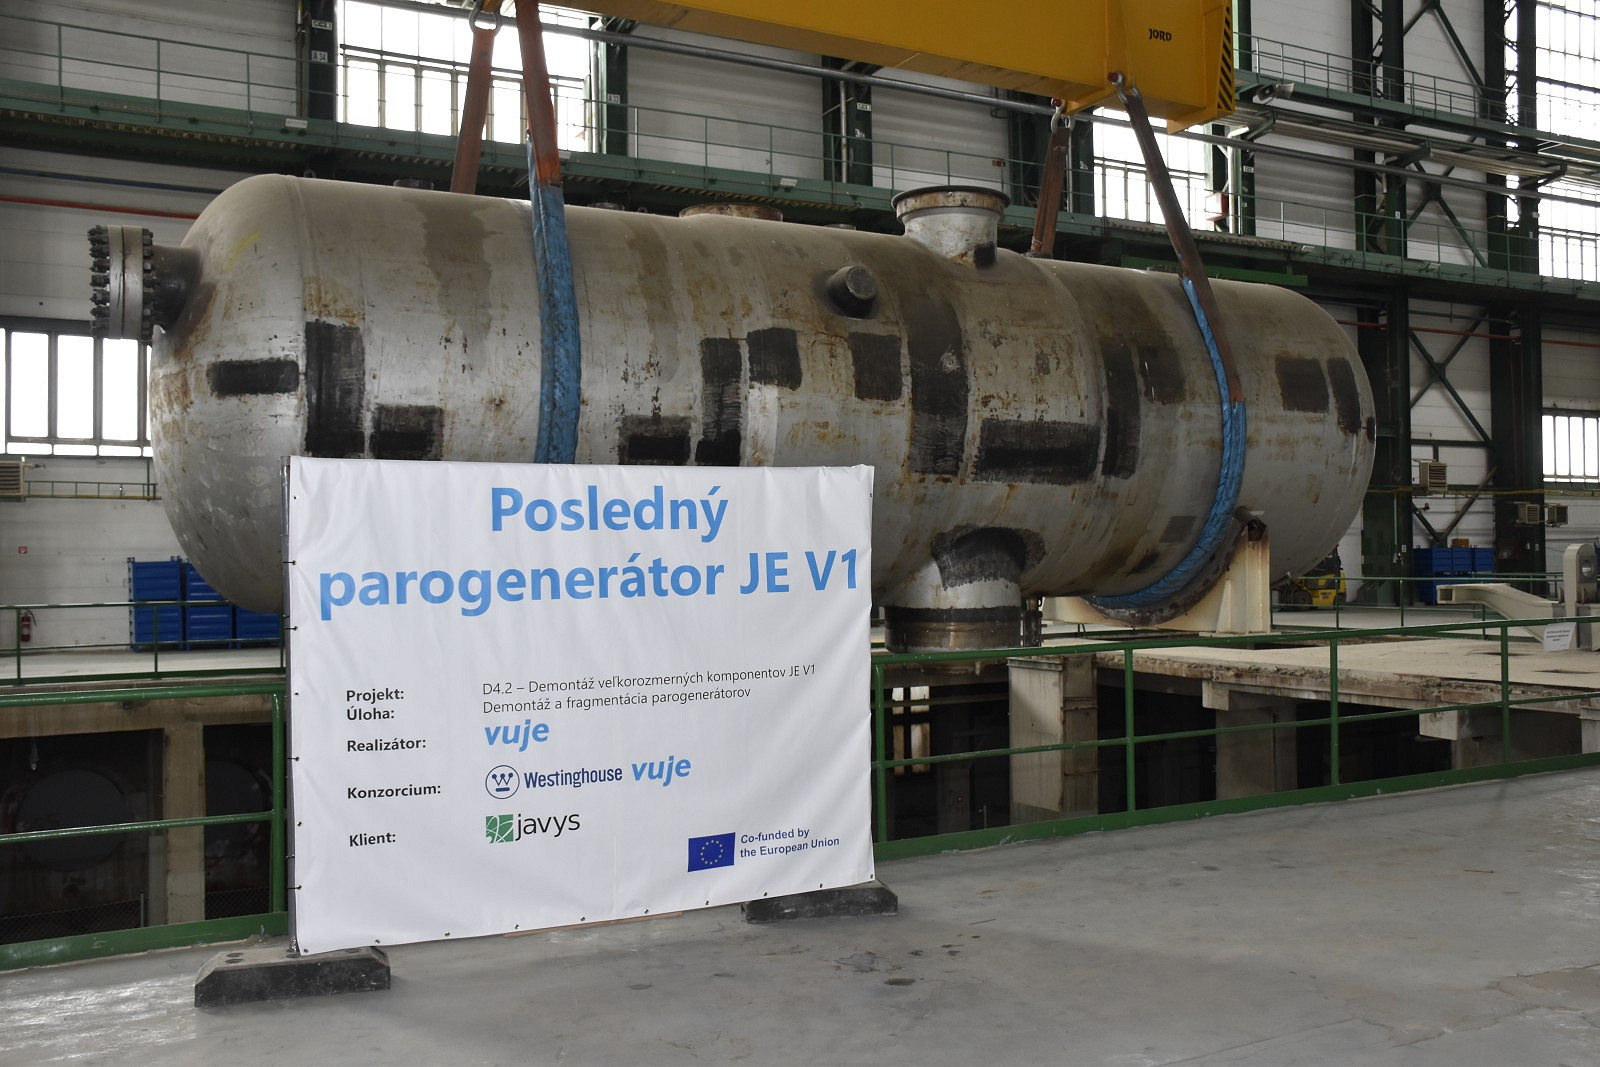 Fragmentation of the final 12th steam generator started in the decommissioned V1 NPP in Jaslovské Bohunice